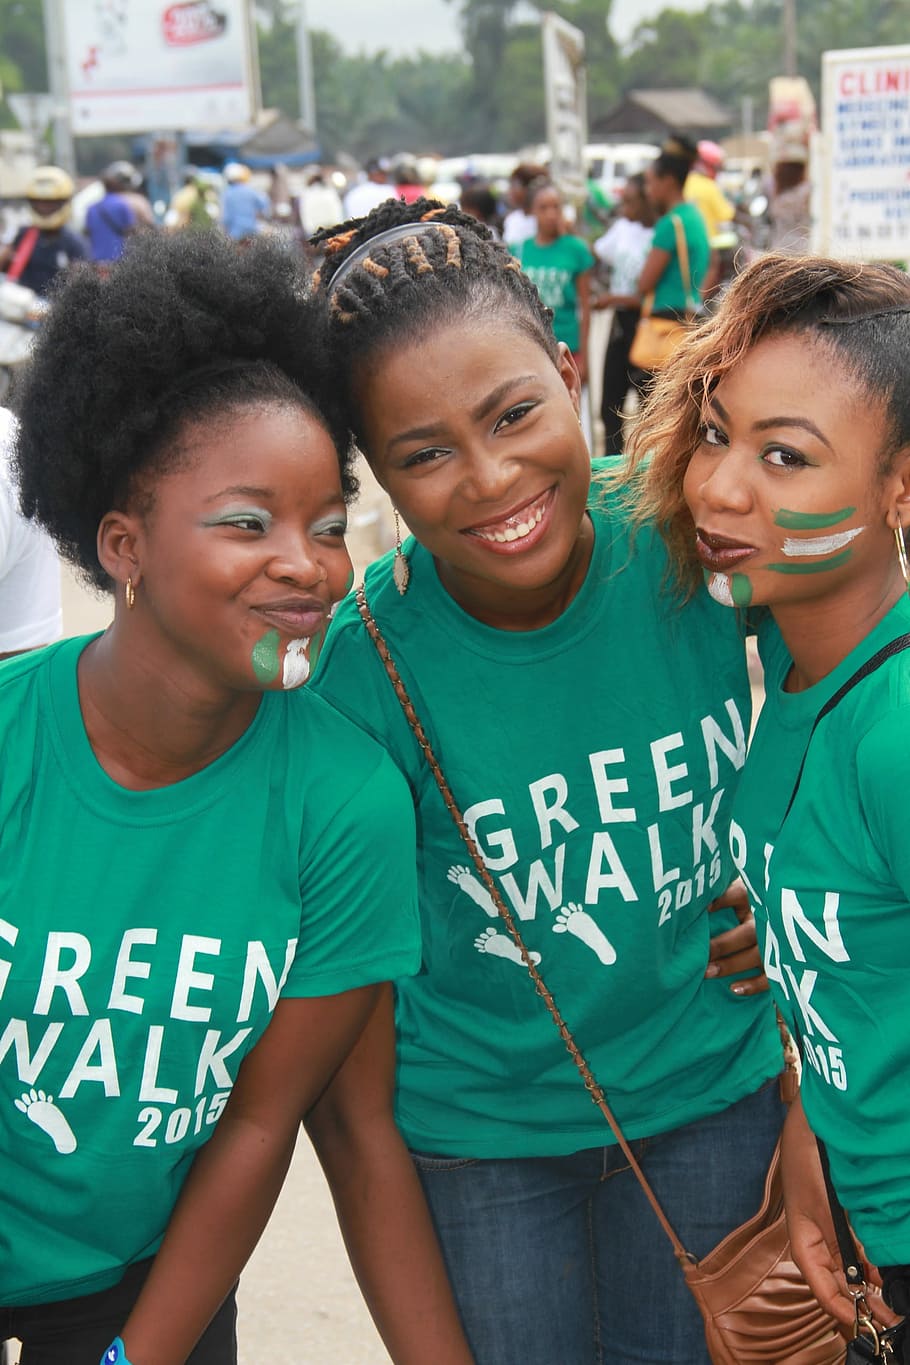 Young, Girls, Smile, Nigerians, Cotonou, young, girls, green walk, happy face, cheerful, standing